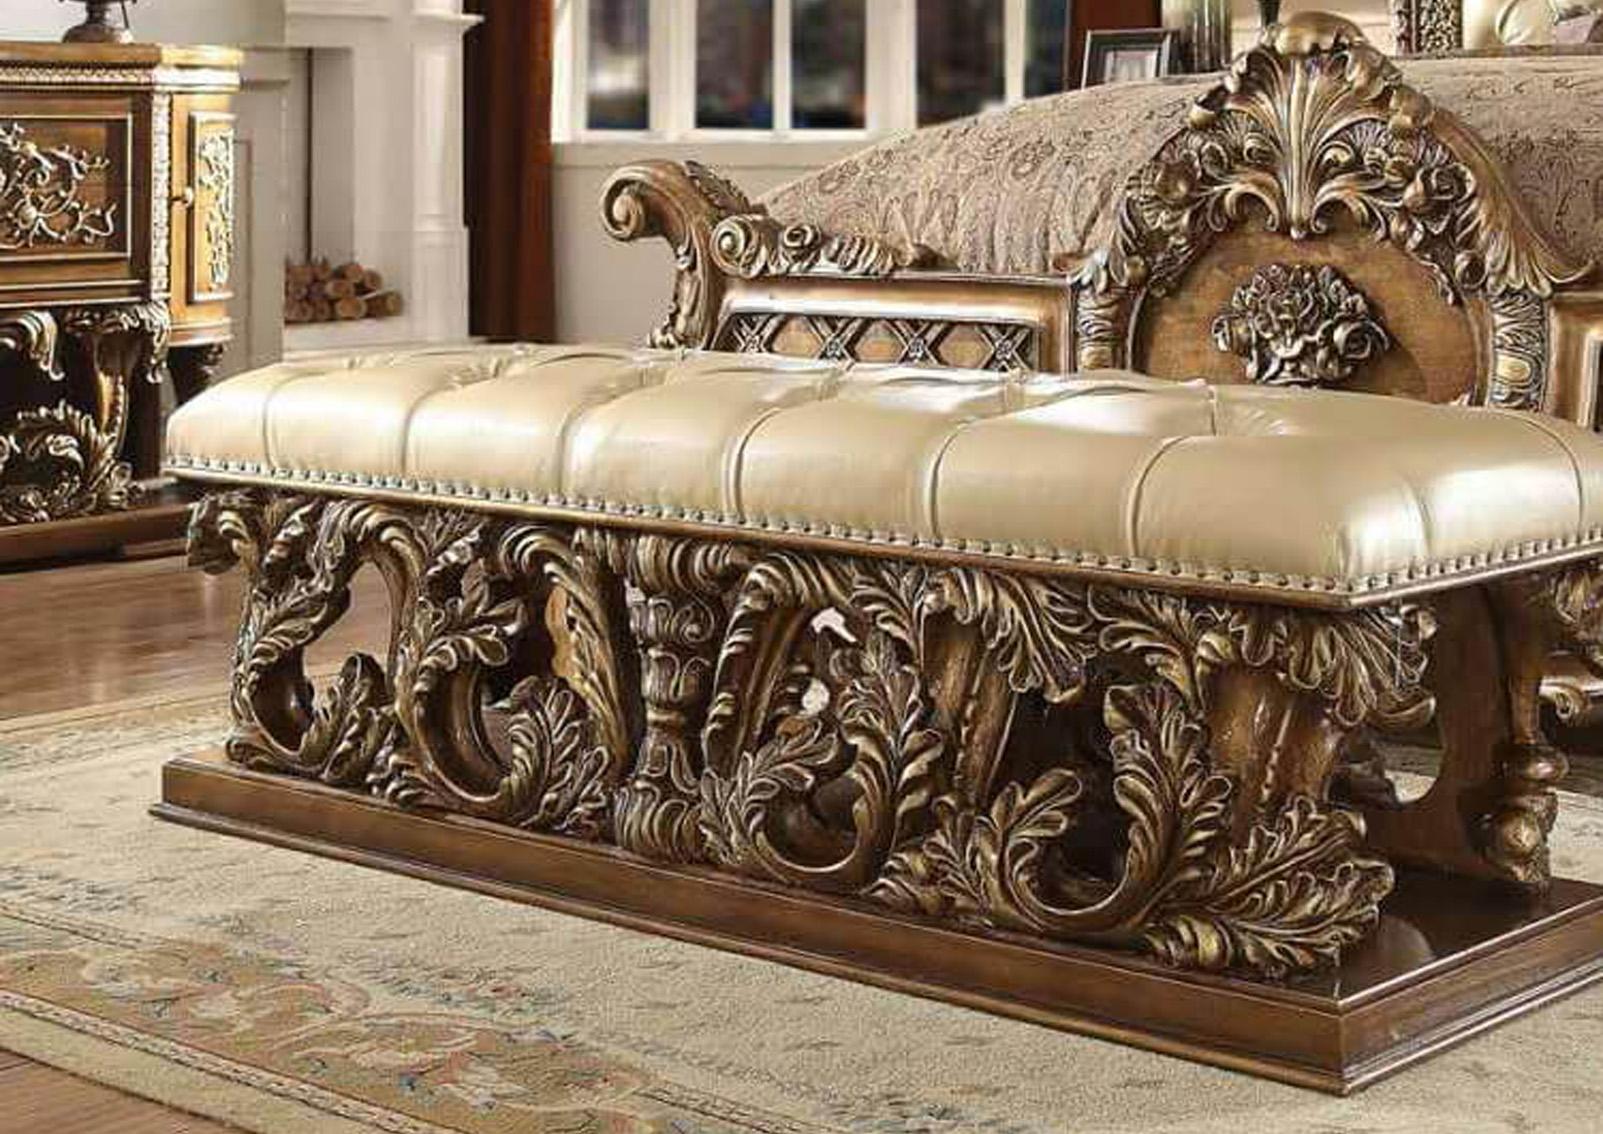 

    
Antique Gold & Brown Tufted Bench Carved Wood Traditional Homey Design HD-8018
